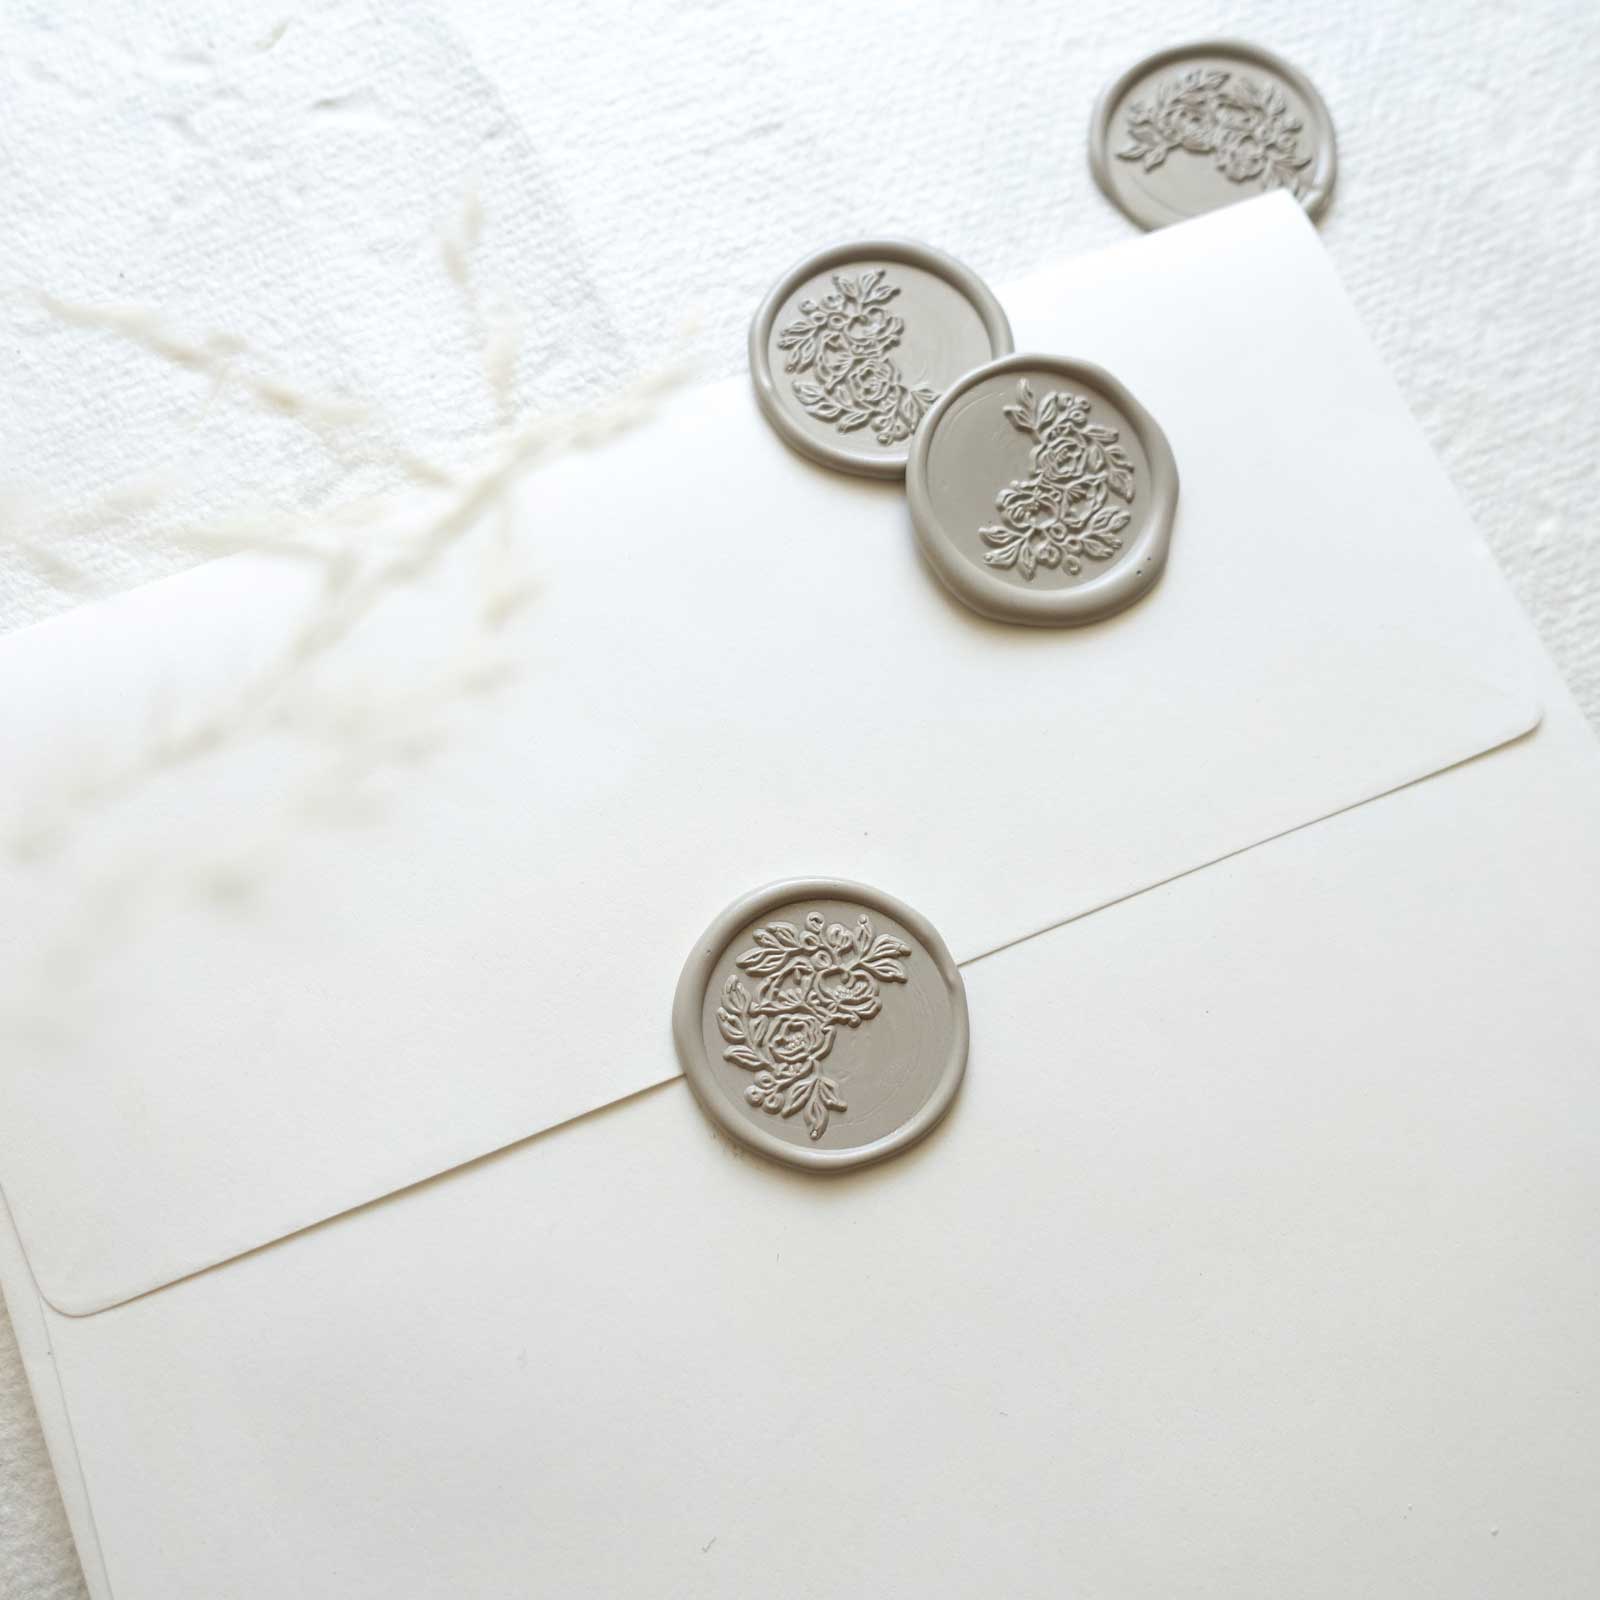 Beige Wax Seal Beads 100 - oblation papers & press